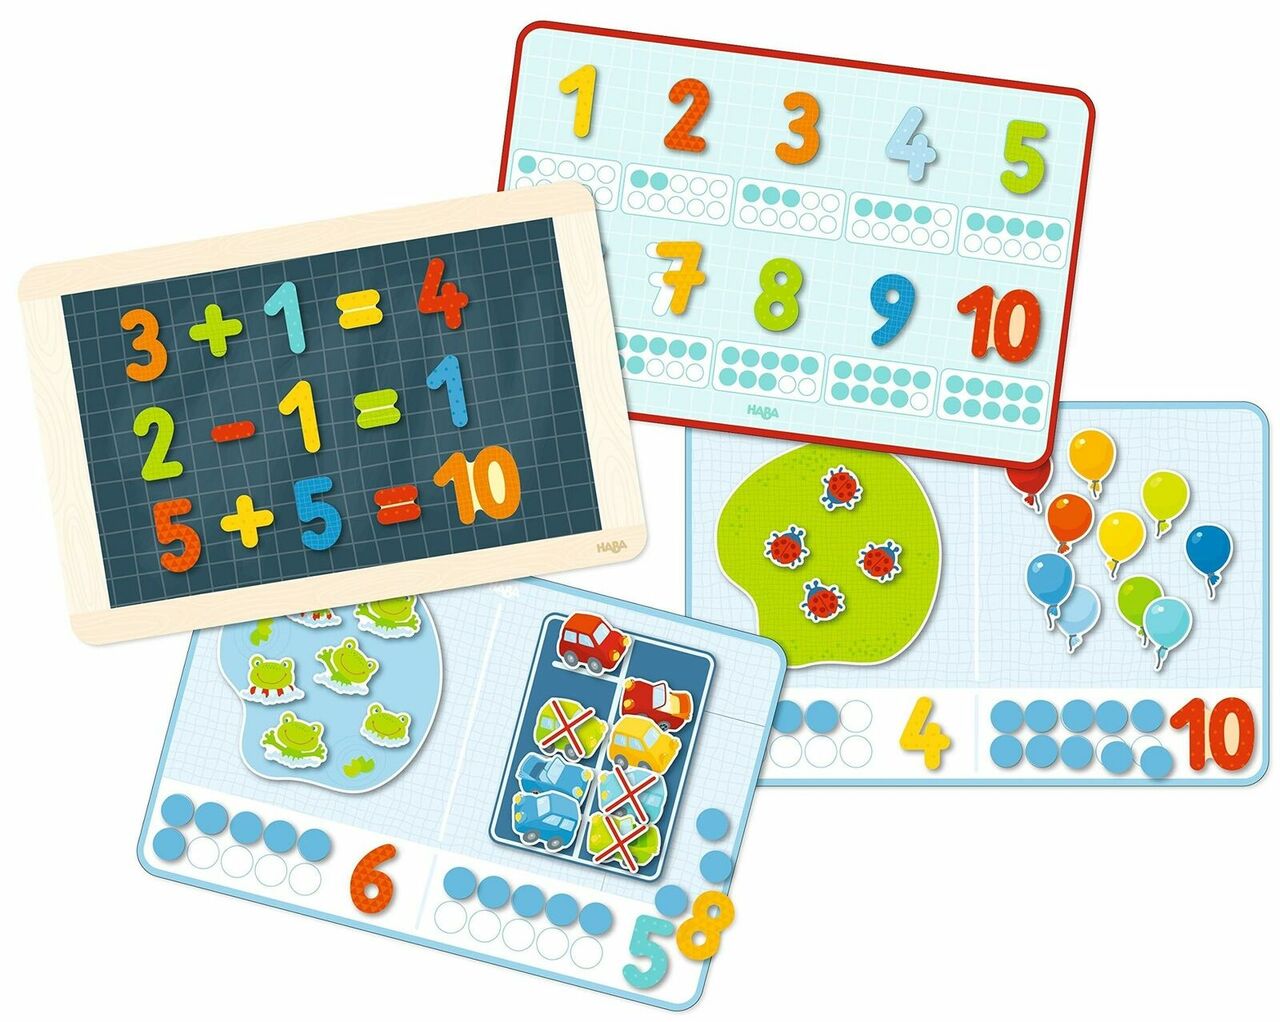 HABA 1,2 Numbers and You Magnetic 158 Piece Game Box